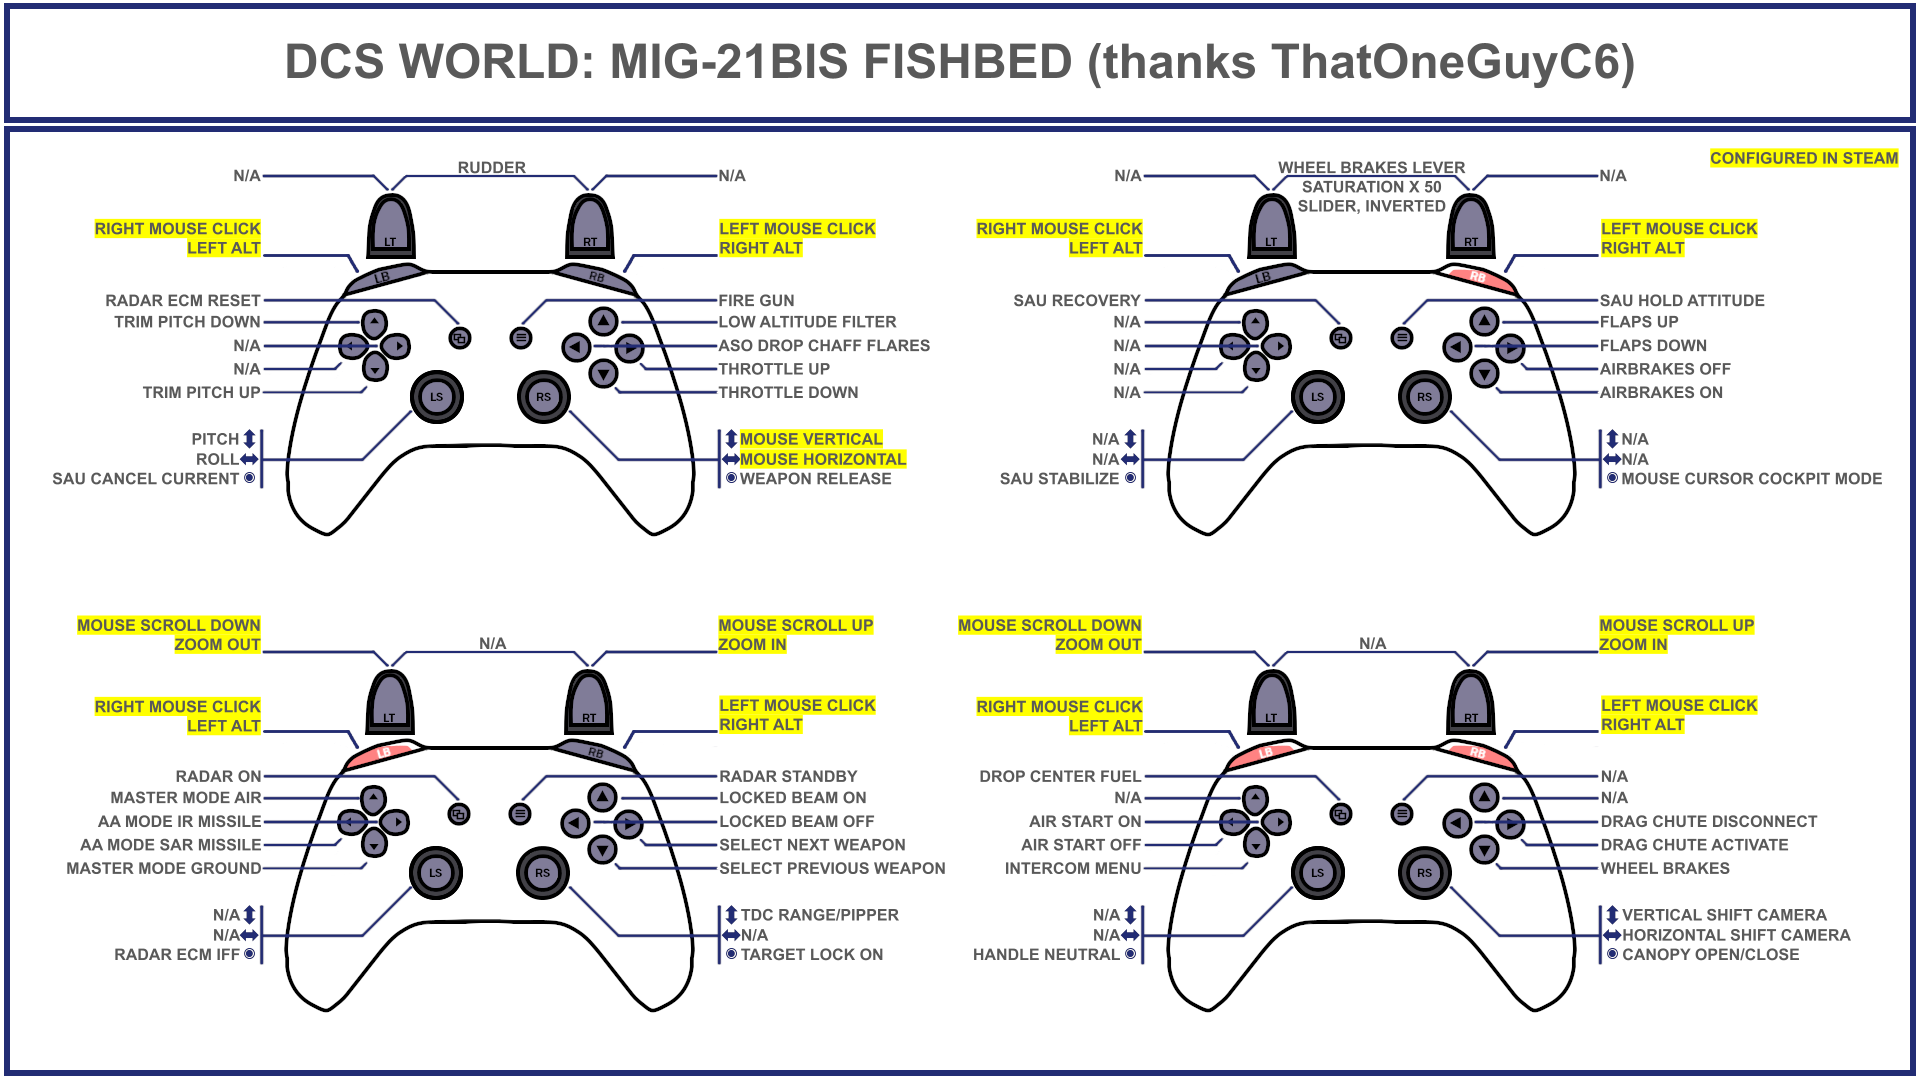 Tuuvas' Official MiG-21bis Fishbed Gamepad Controller Layout